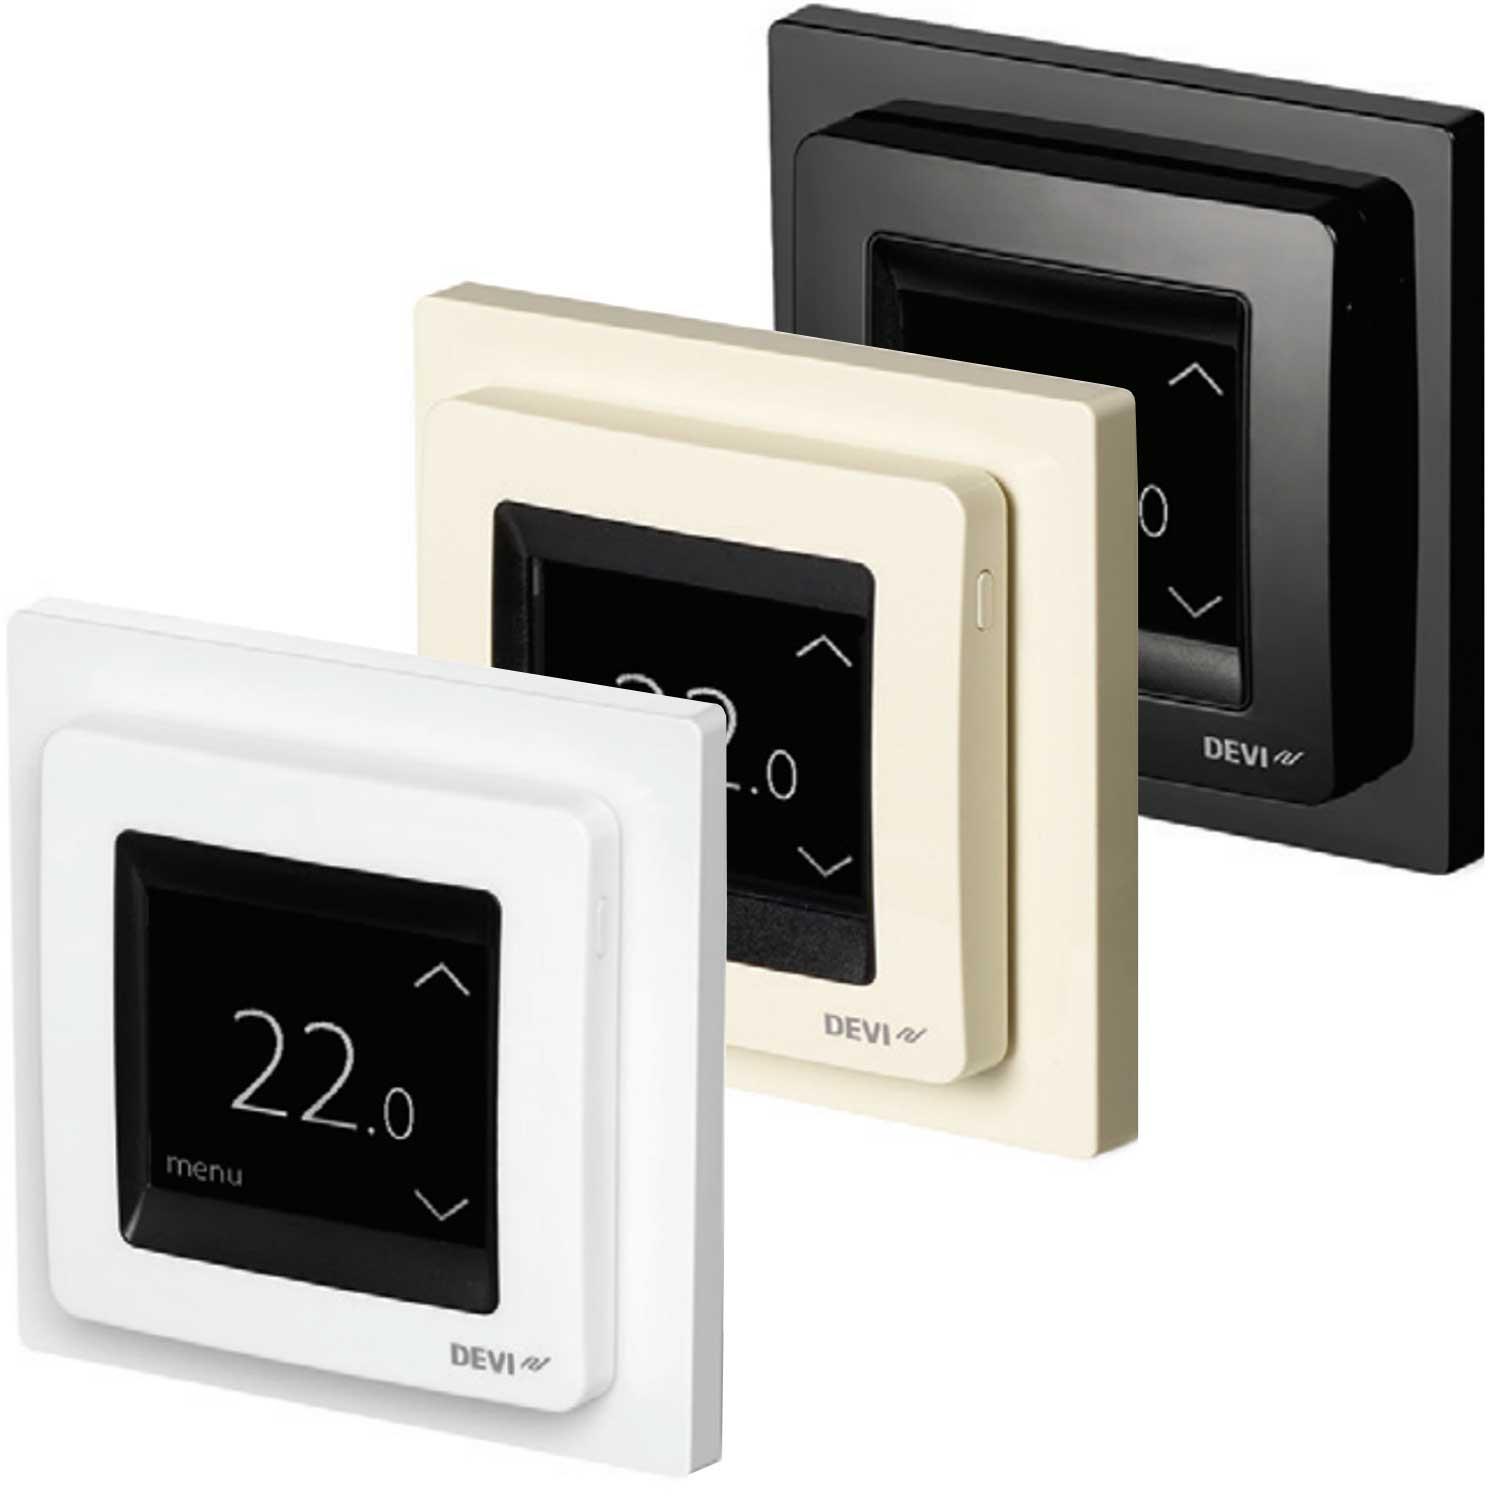 DEVIreg Touch Thermostat Programmable Timer